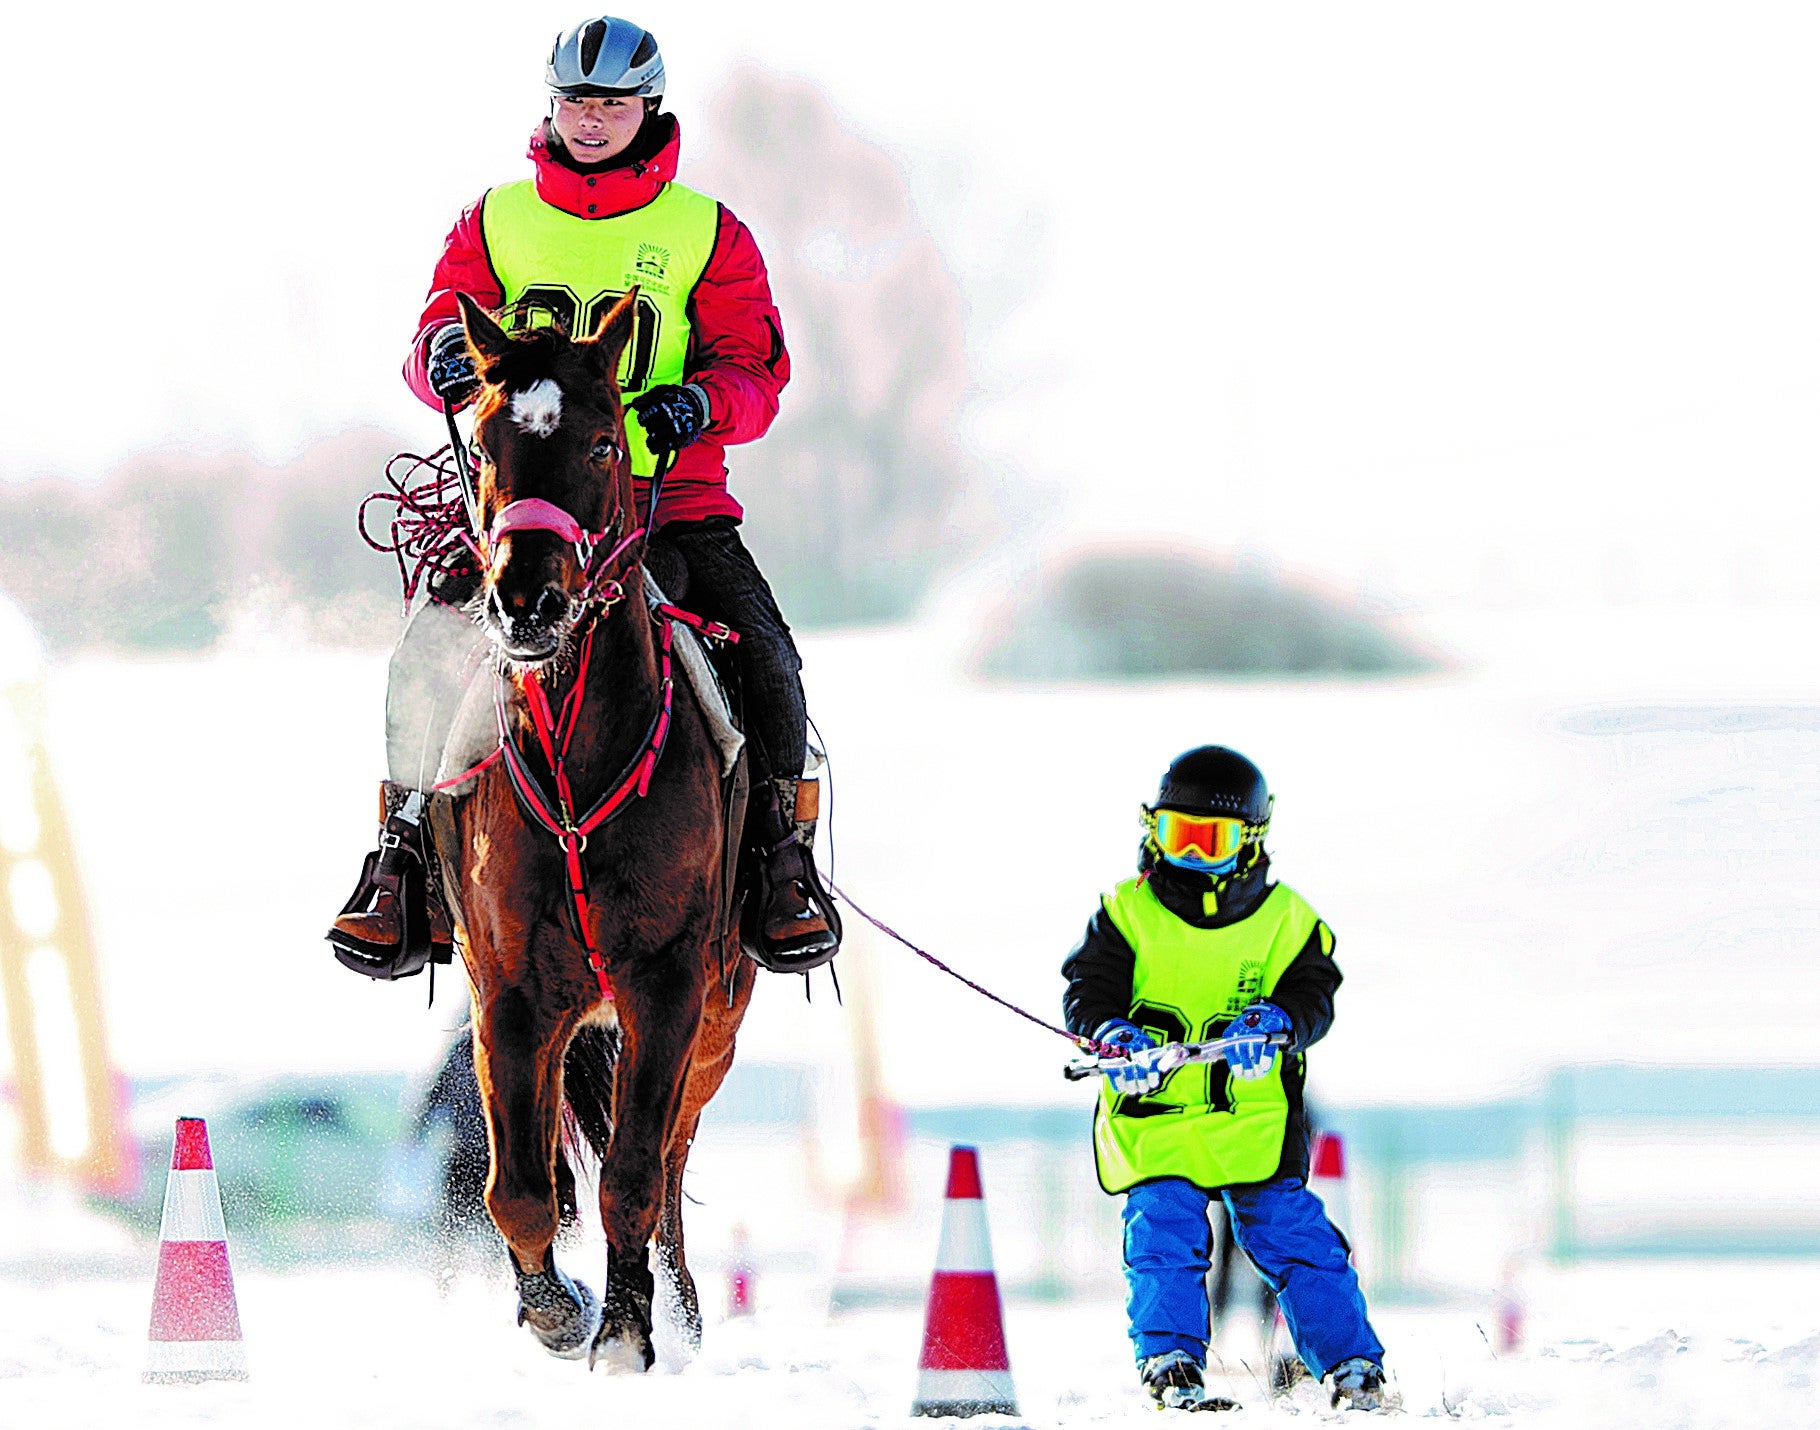 Horse-related winter sports draw both adults and children